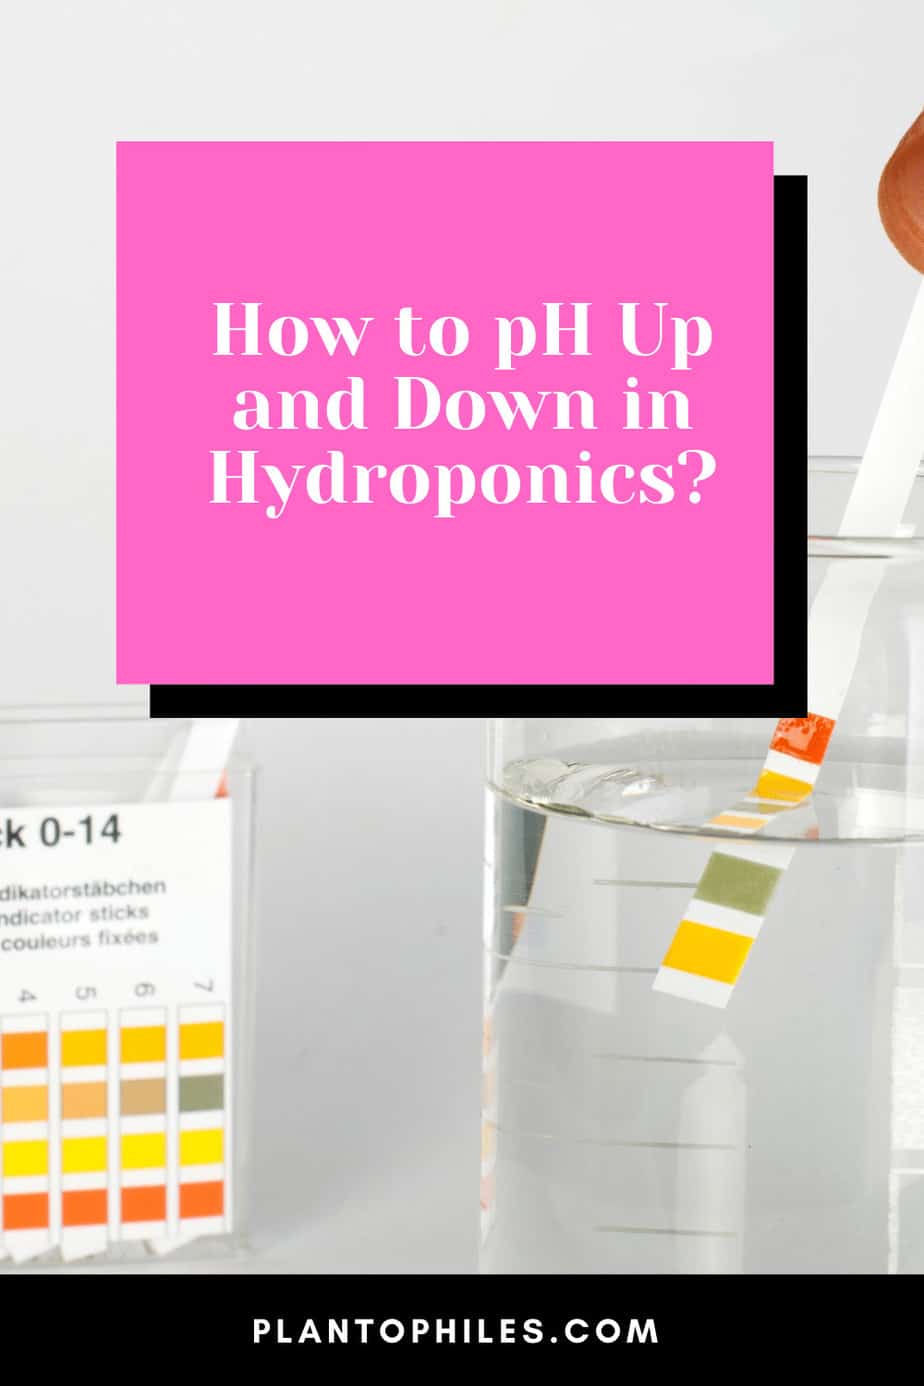 How to pH Up and Down in Hydroponics